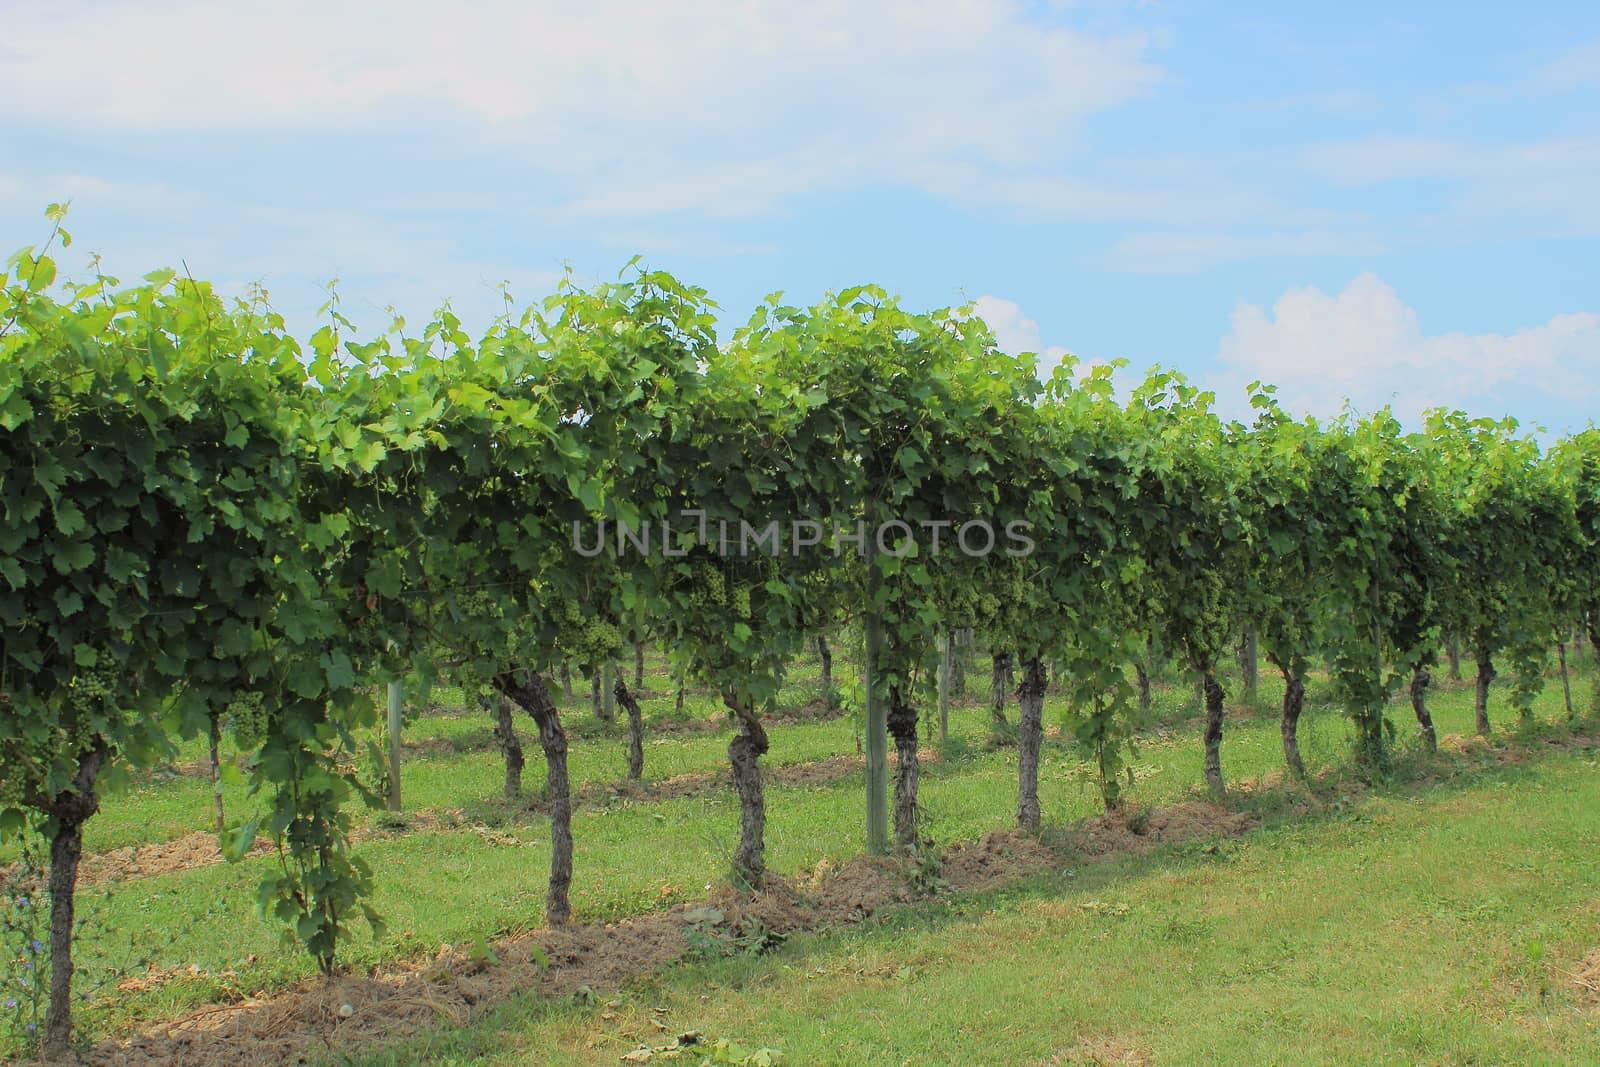 Row of wine stock at vineyard in Italy